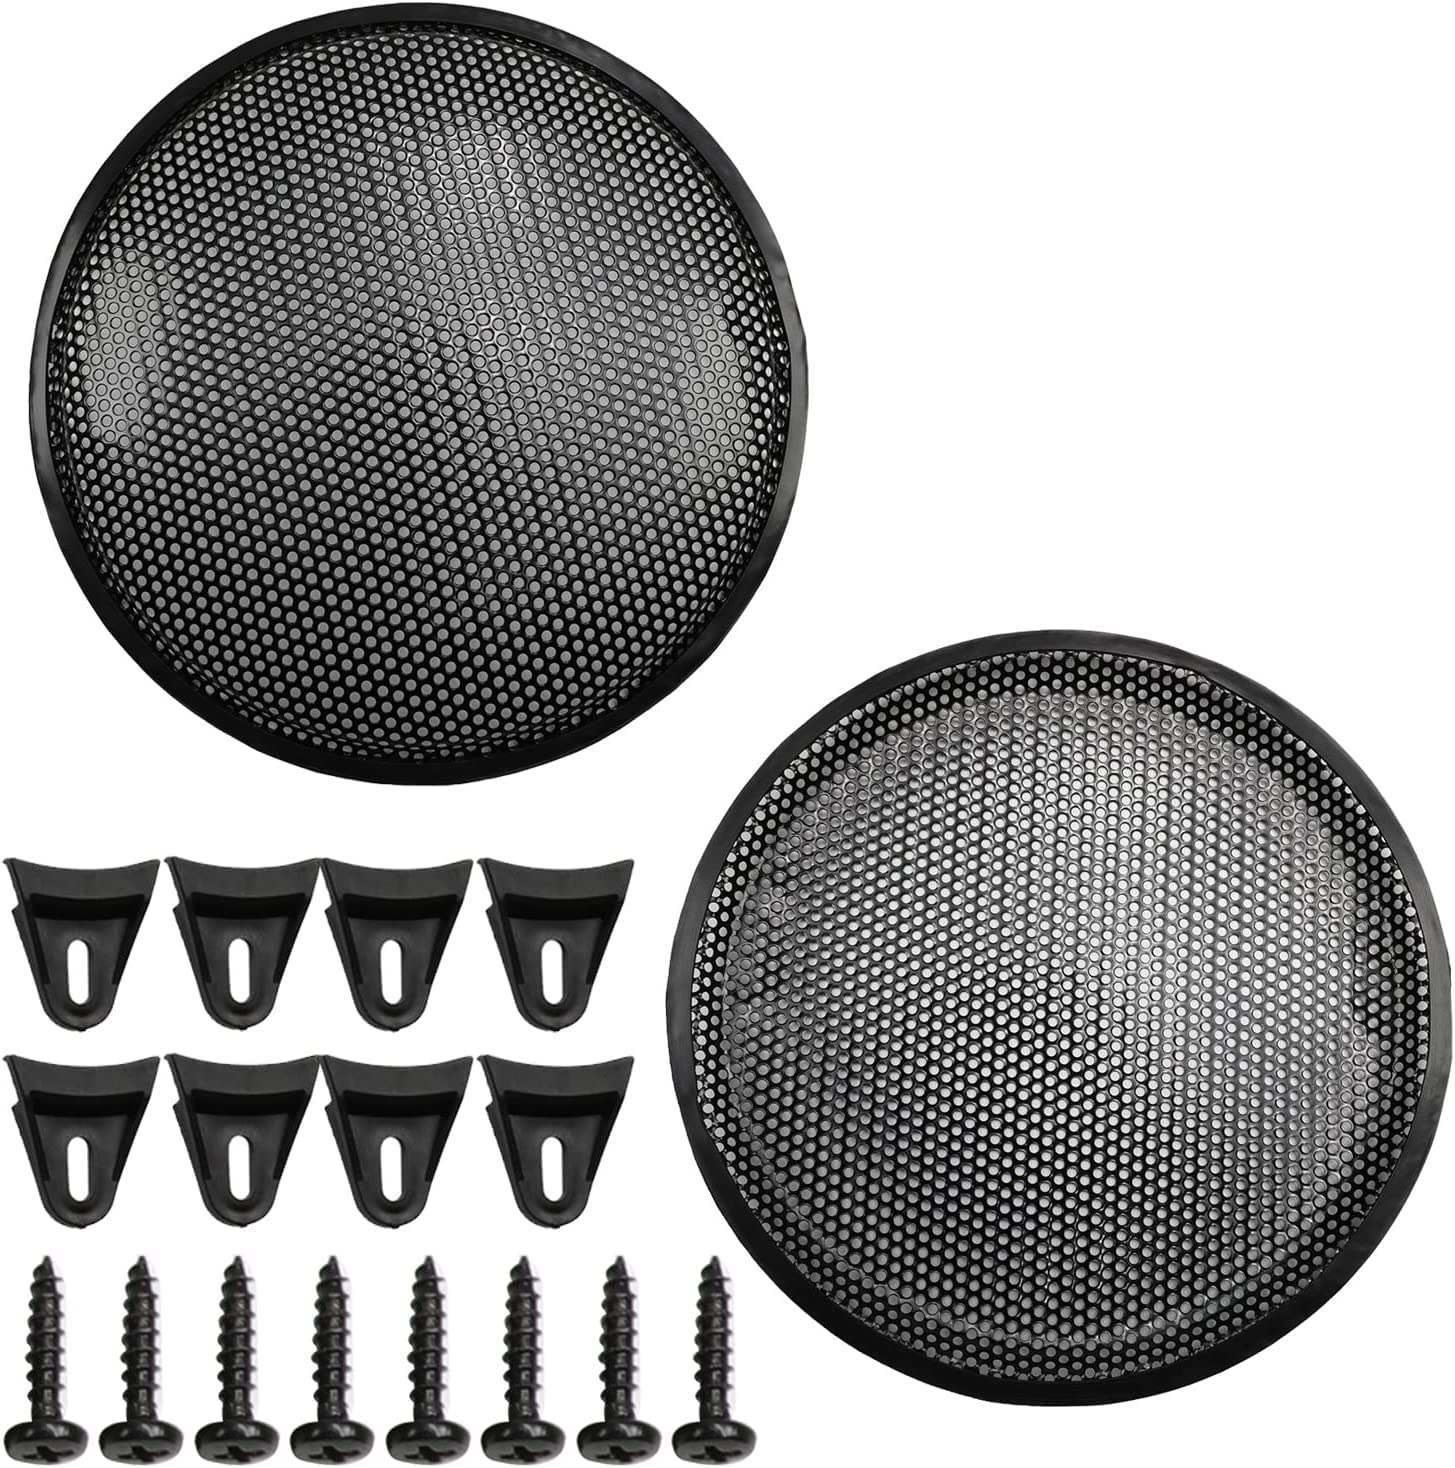 Bettomshin 2Pcs 12inch /307mm Speaker Grill Mesh Decorative Circle Woofer Guard Protector Cover Audio Accessories Black